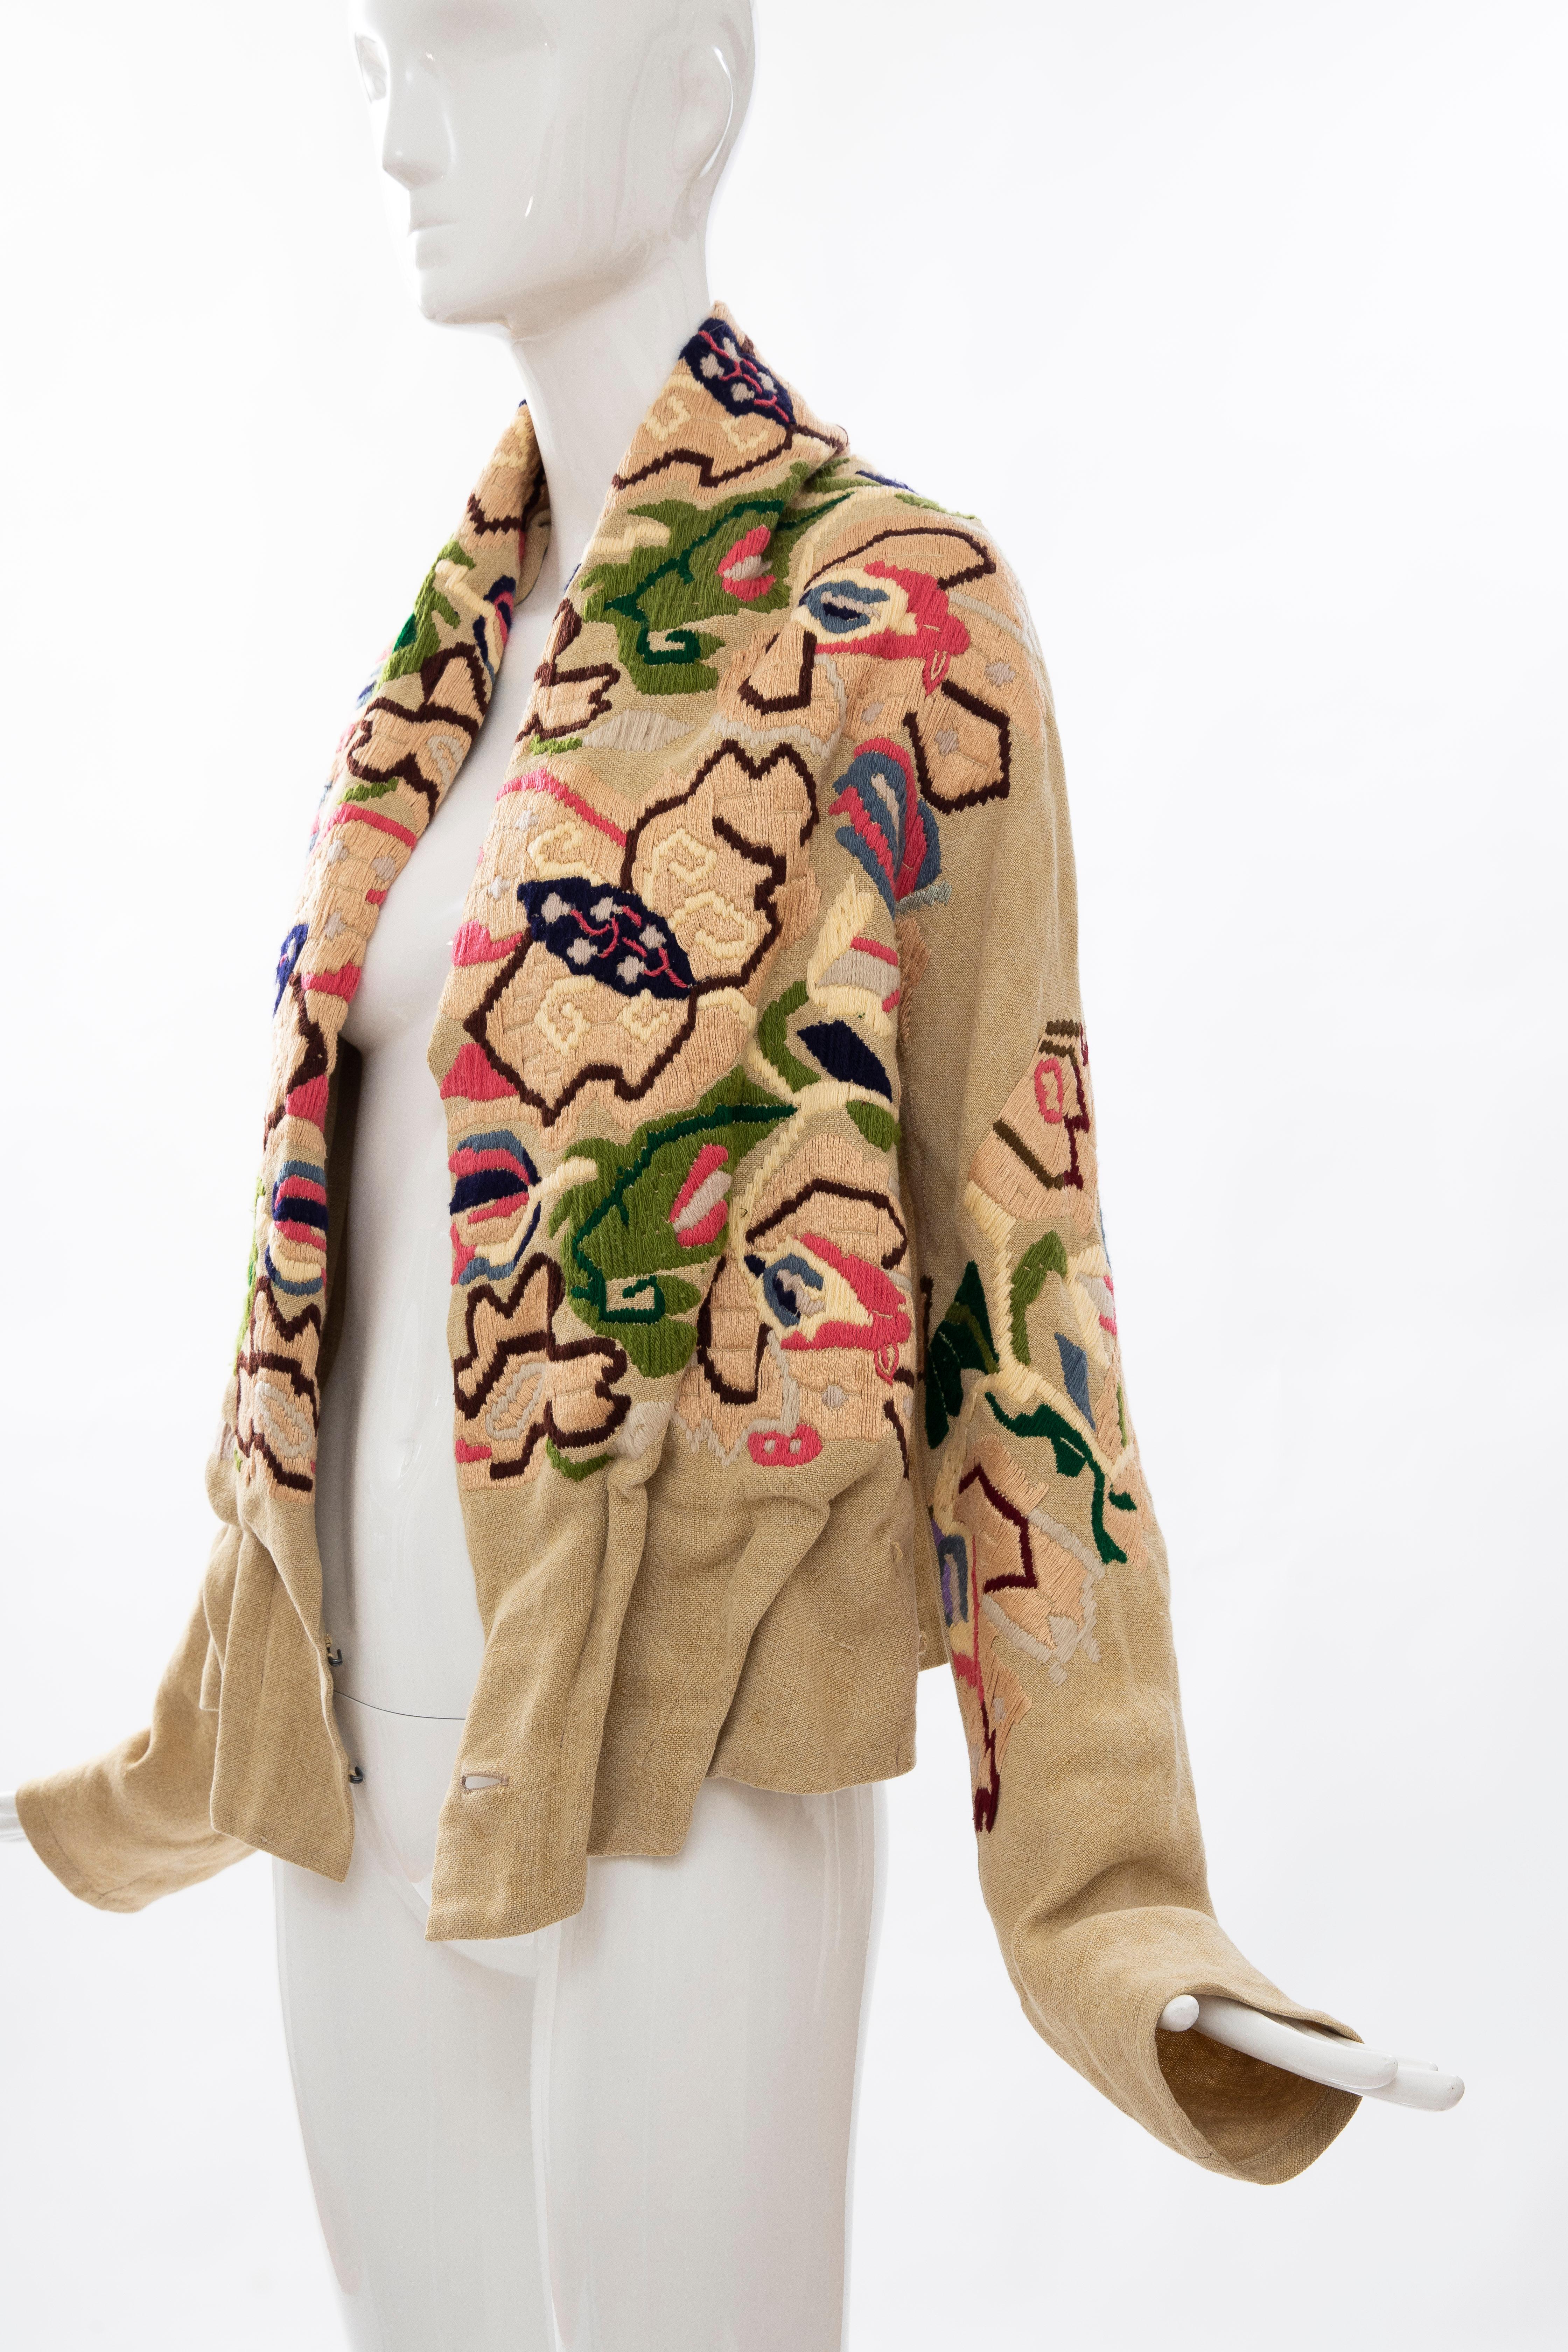 Dries Van Noten Runway Floral Embroidered Linen Jacket, Fall 2002 For Sale 4